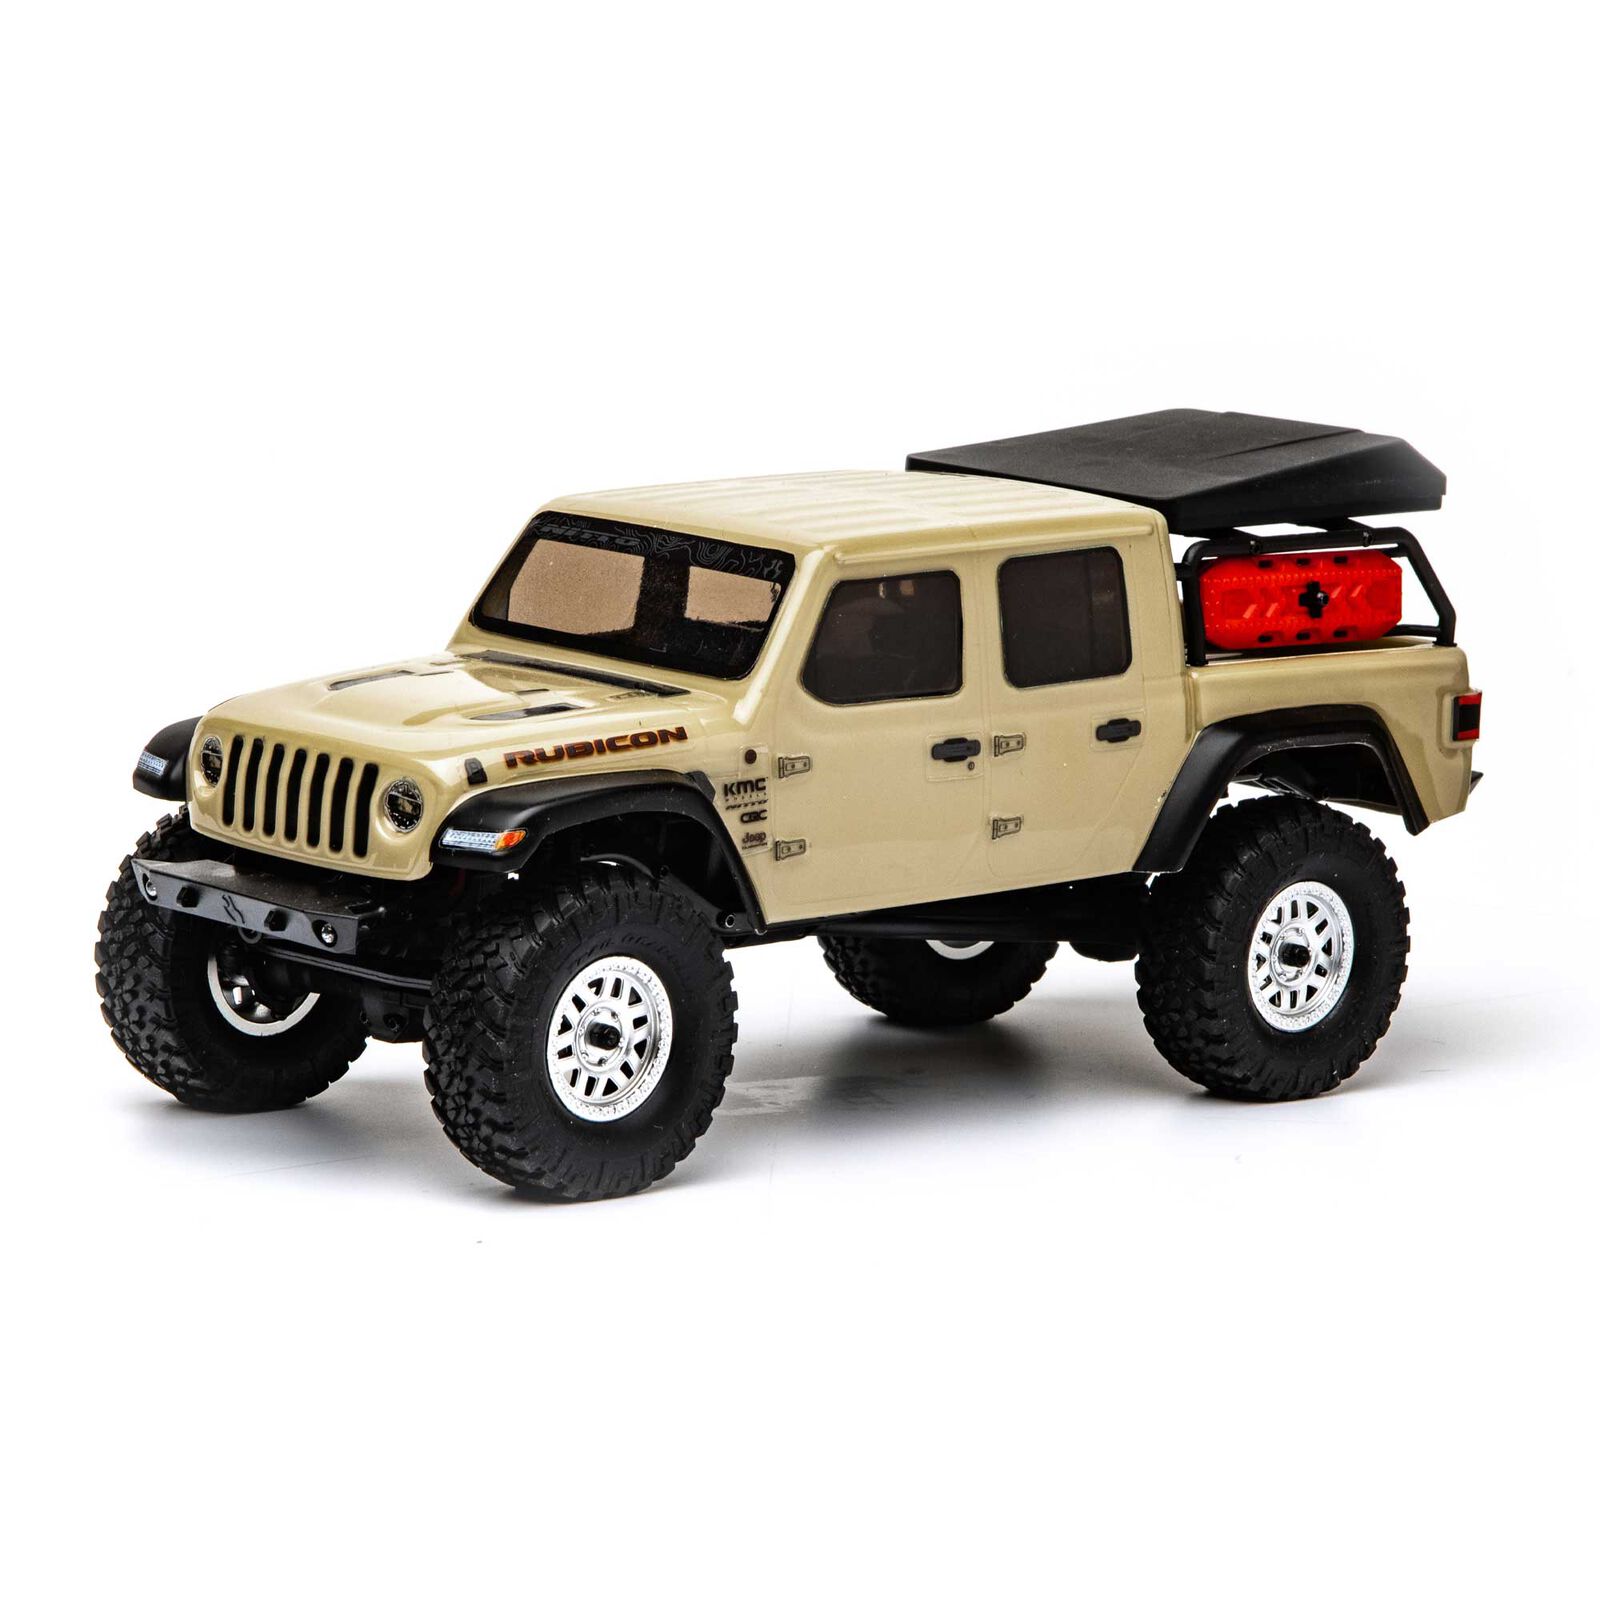 RC Crawler & Scale Cars at Modellsport Schweighofer - Order Online Now